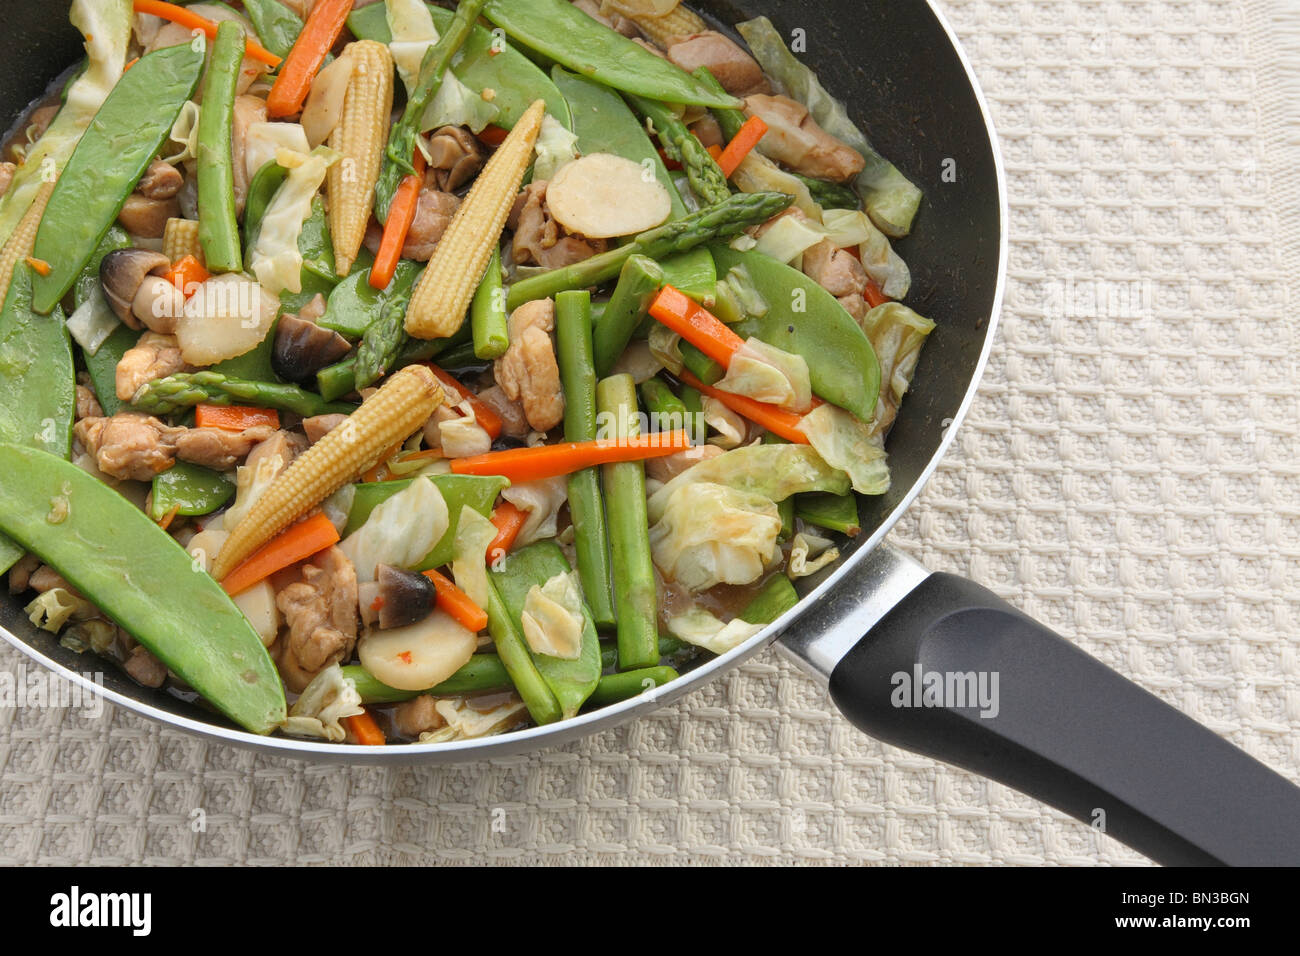 Chinese teriyaki chicken stir fry with vegetables in wok Stock Photo